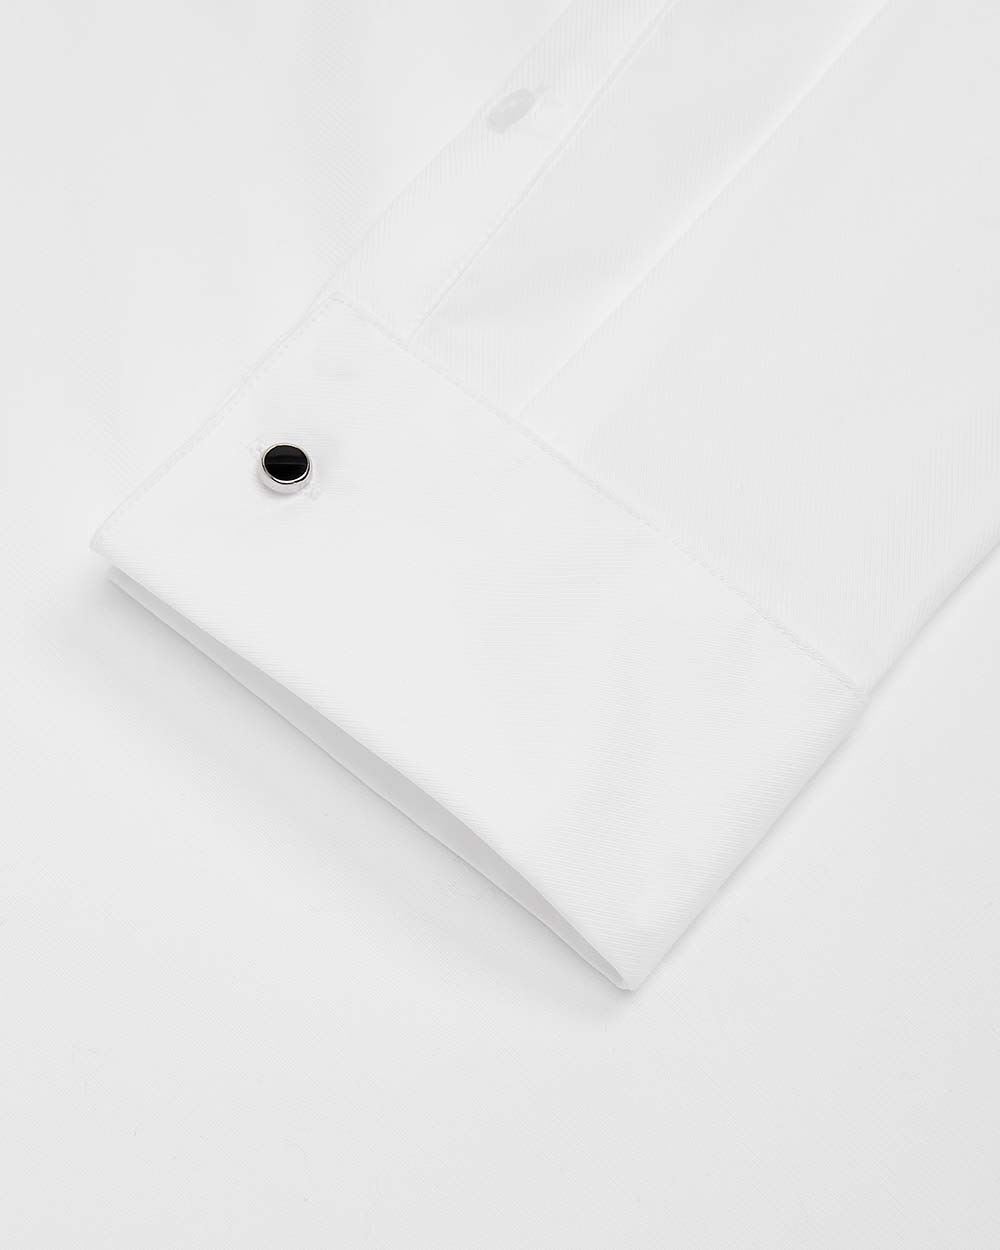 Slim fit dress shirt with black buttons and French Cuff